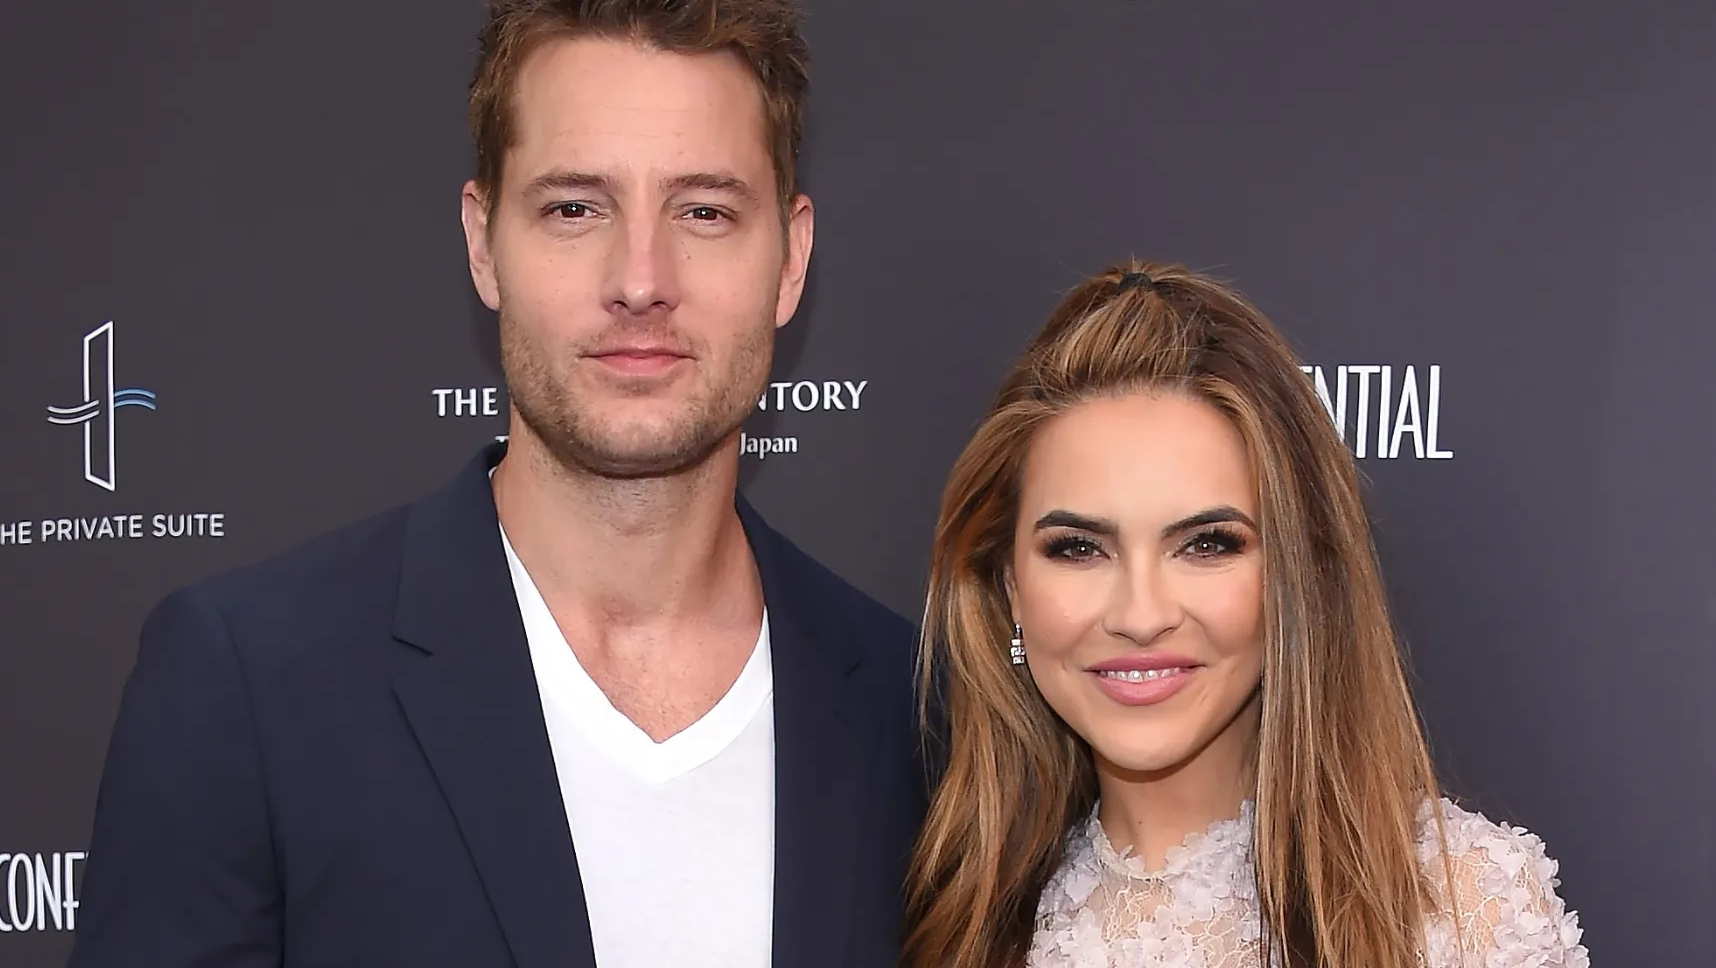 ‘This Is Us’ Star Justin Hartley Settles His Divorce With Ex-Wife Chrishell Stause